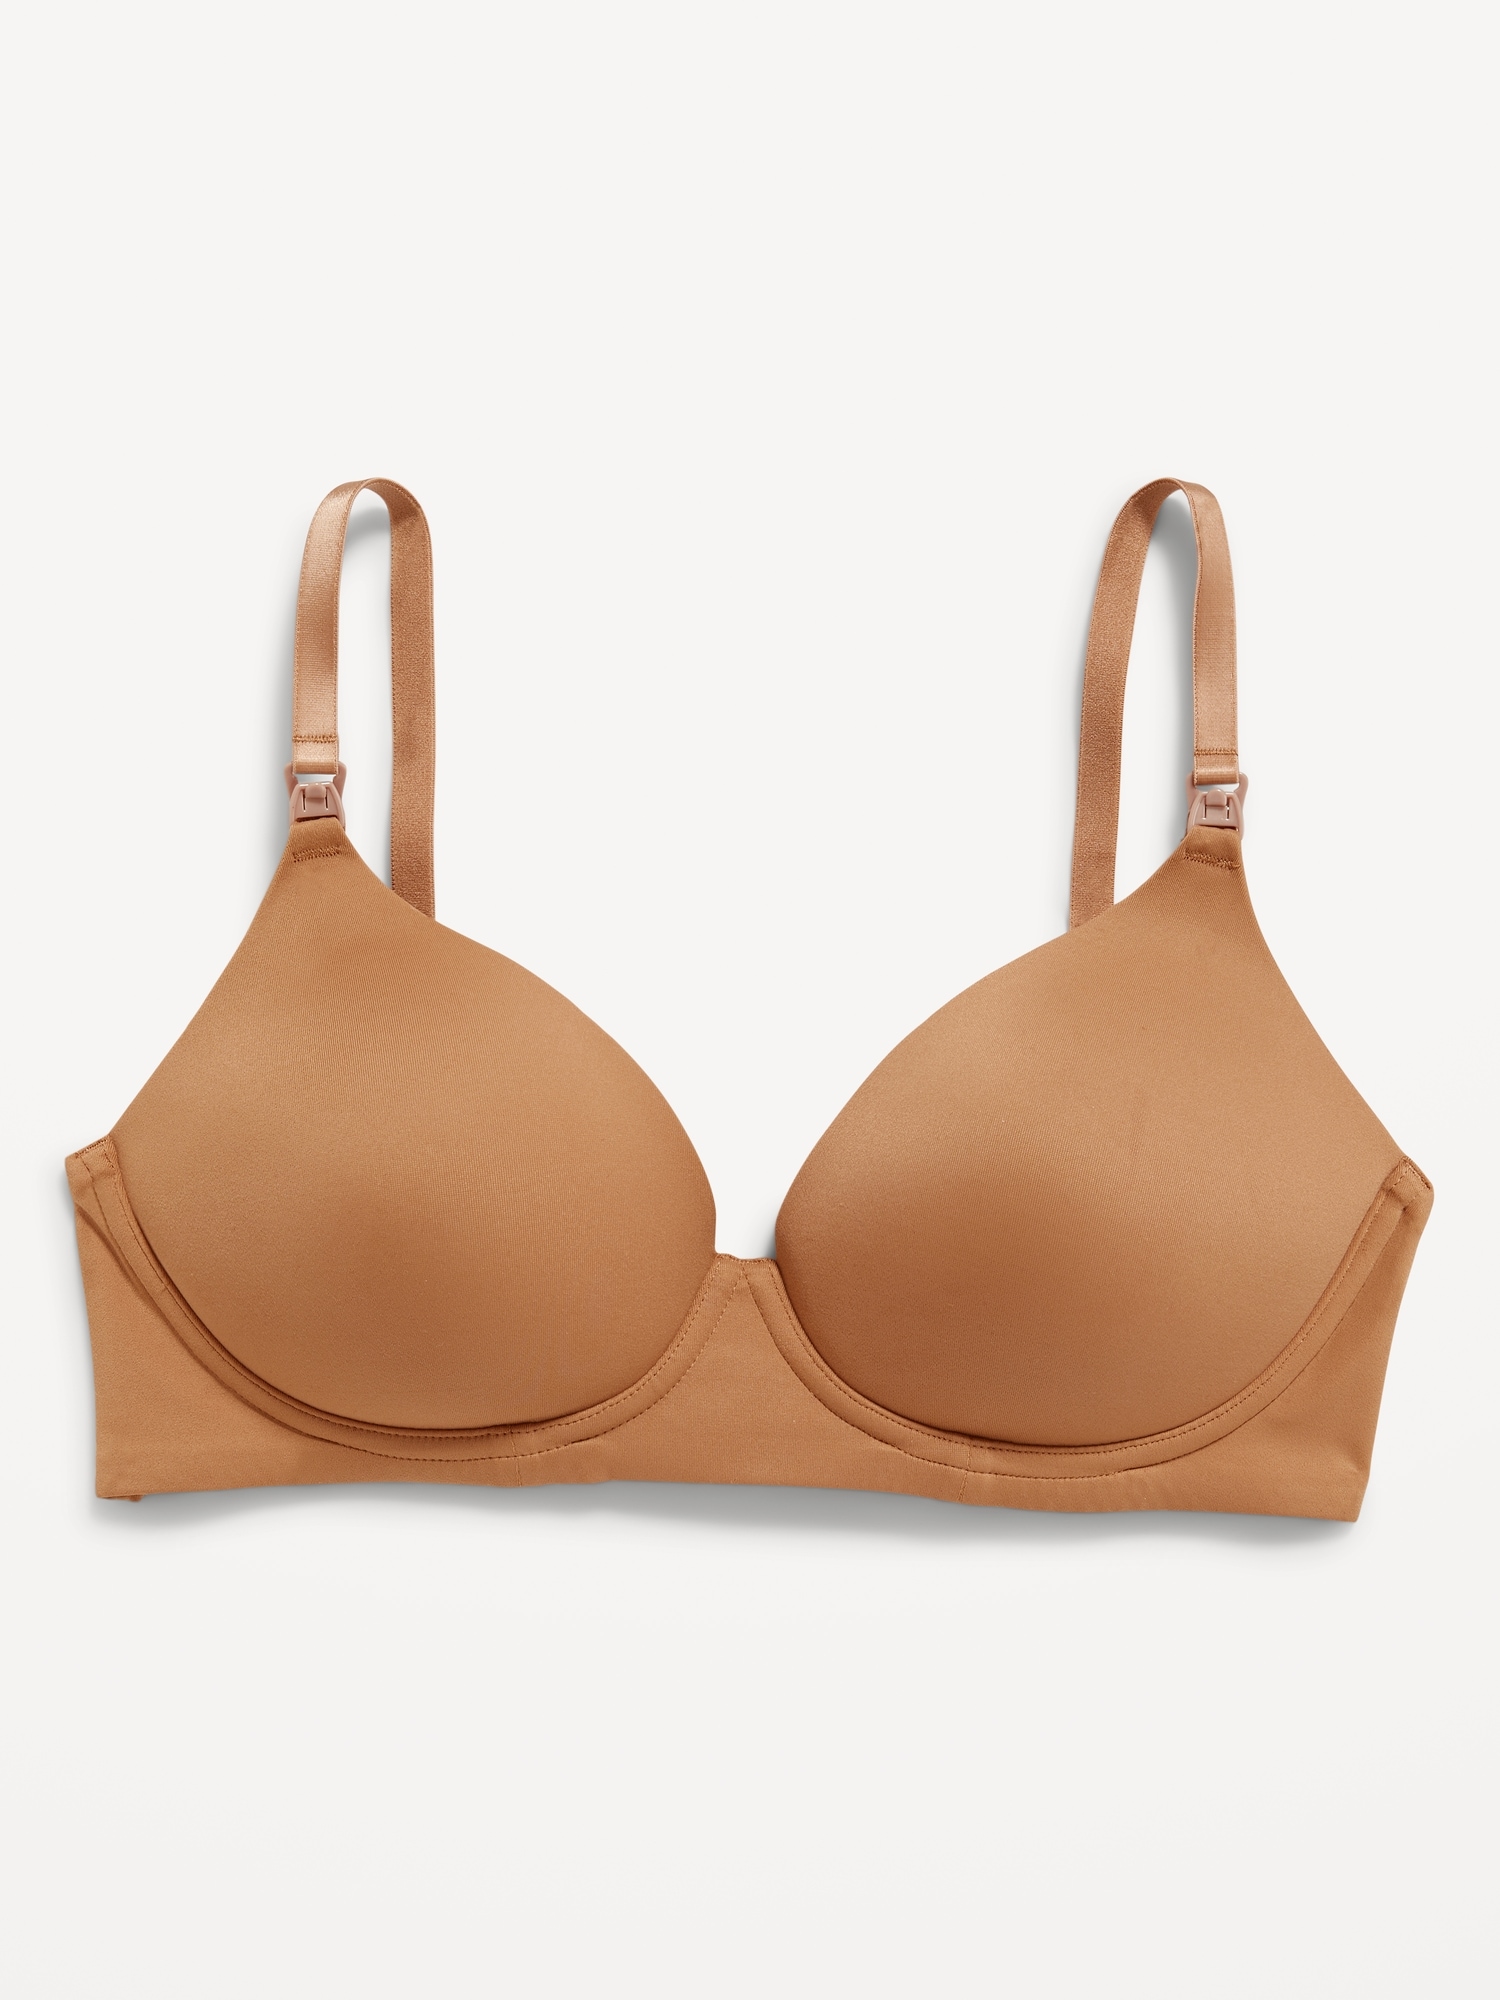 Anoah Mother Care - Nursing Bra (Capri) Designed to provide quick and easy  access to the breast for the purpose of breastfeeding an infant. It has a  flap that can be unclipped